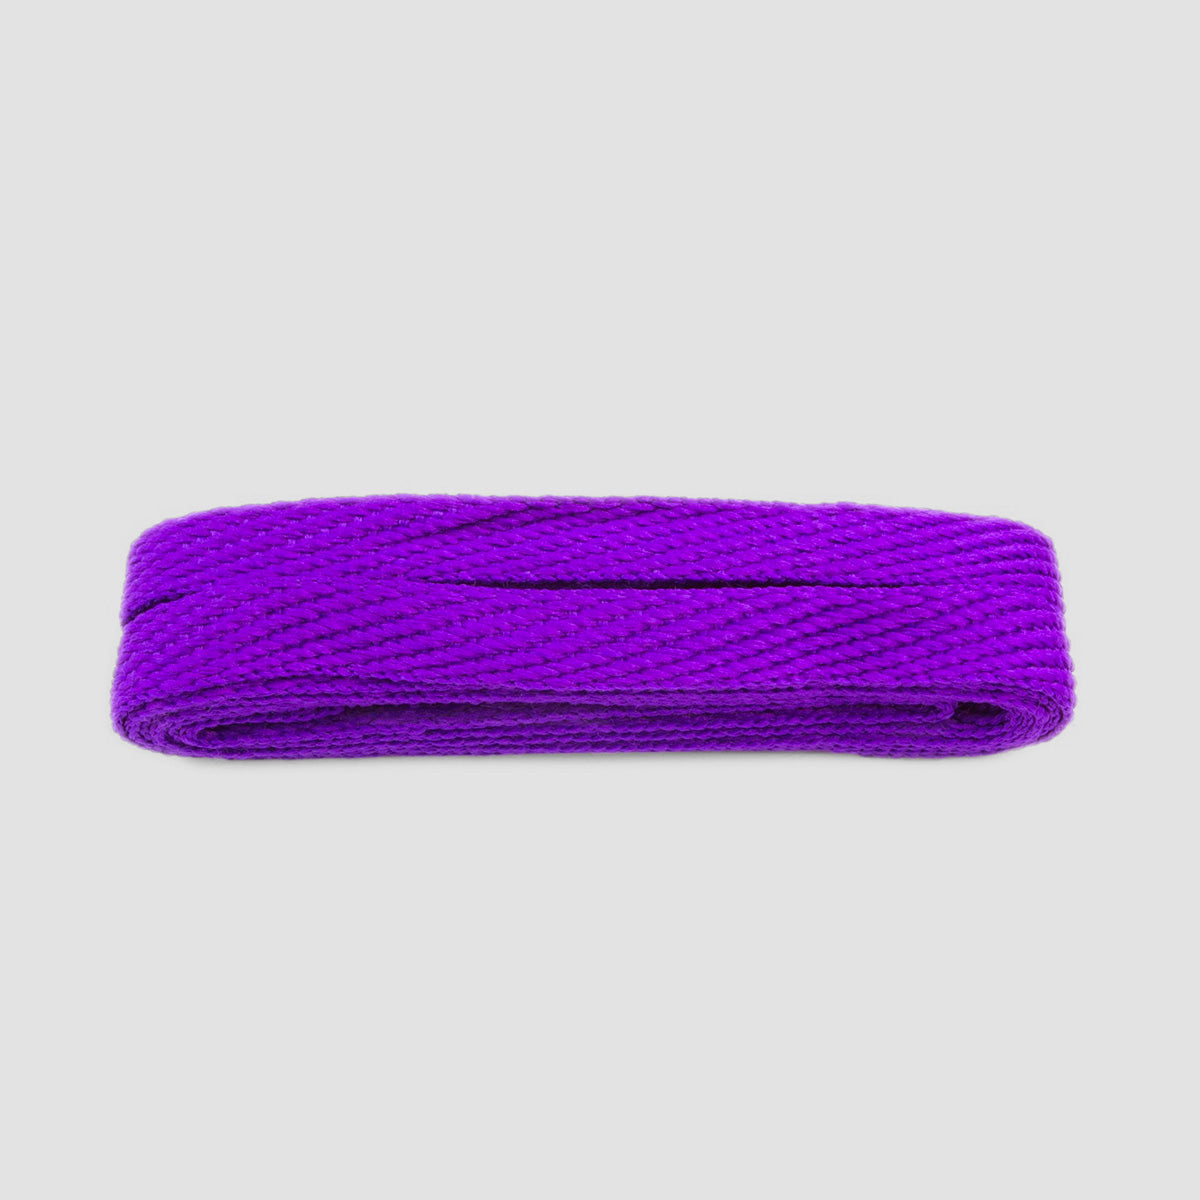 ShoeString American Flat 10mm 120cm Laces (Blister Pack) Purple